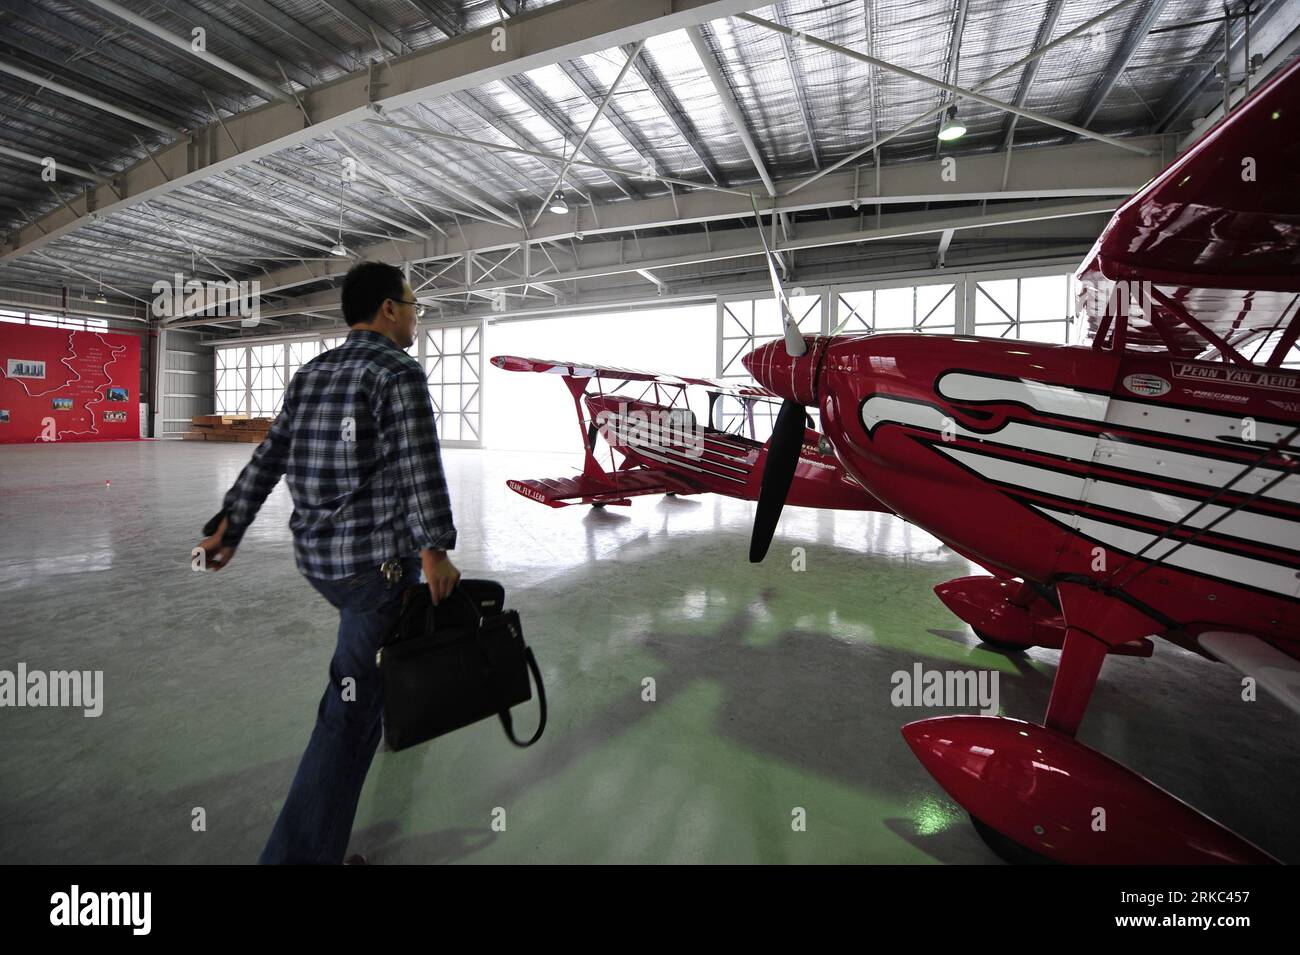 Bildnummer: 54661532  Datum: 19.11.2010  Copyright: imago/Xinhua (101120) -- ZHUHAI, Nov. 20, 2010 (Xinhua) -- A man walks past an aircraft of the U.S. Red Eagle Aerobatic Team in a hangar of the base of Cirrus Design Corporation Fixed Base Operator (FBO) in Zhuhai, south China s Guangdong Province, Nov. 19, 2010. The FBO base, covering an area of 2,806 square meters, was finished during the 8th China International Aviation & Aerospace Exhibition in Zhuhai. It provides general aviation services for private planes including maintenance, training, flight rental and experience flight services. (X Stock Photo